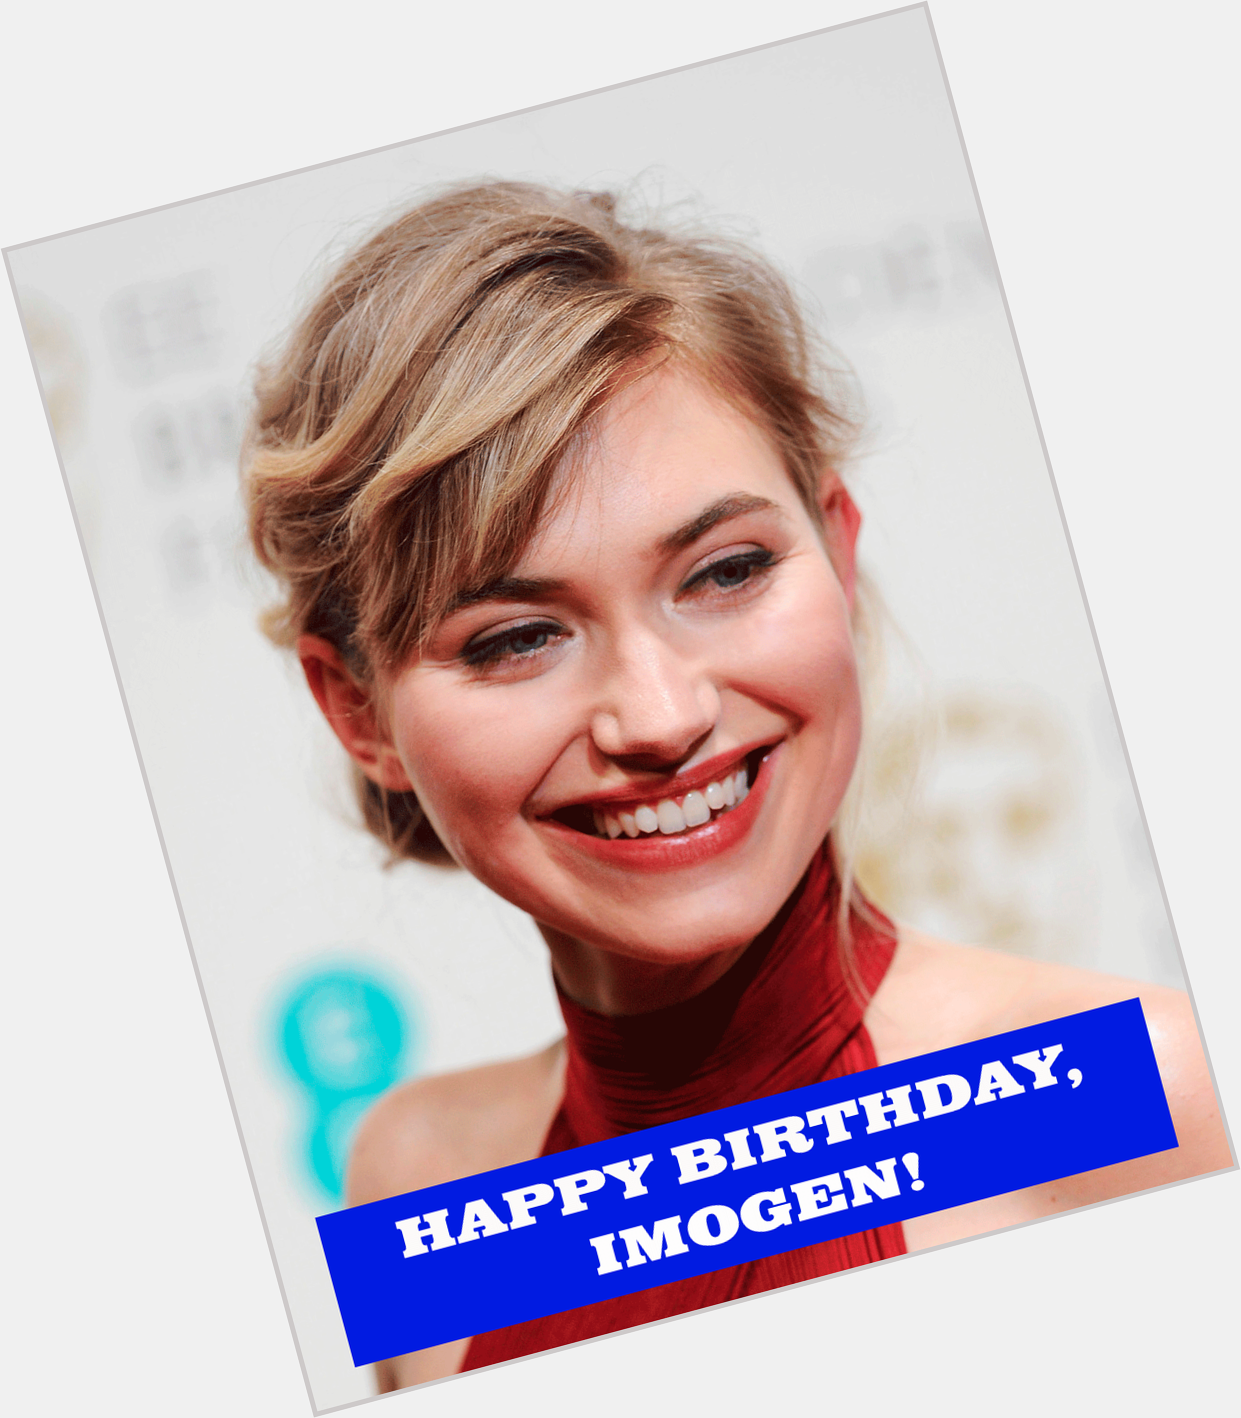 Happy Birthday to Imogen Poots! You might remember her as the straight arrow police officer in \Filth  